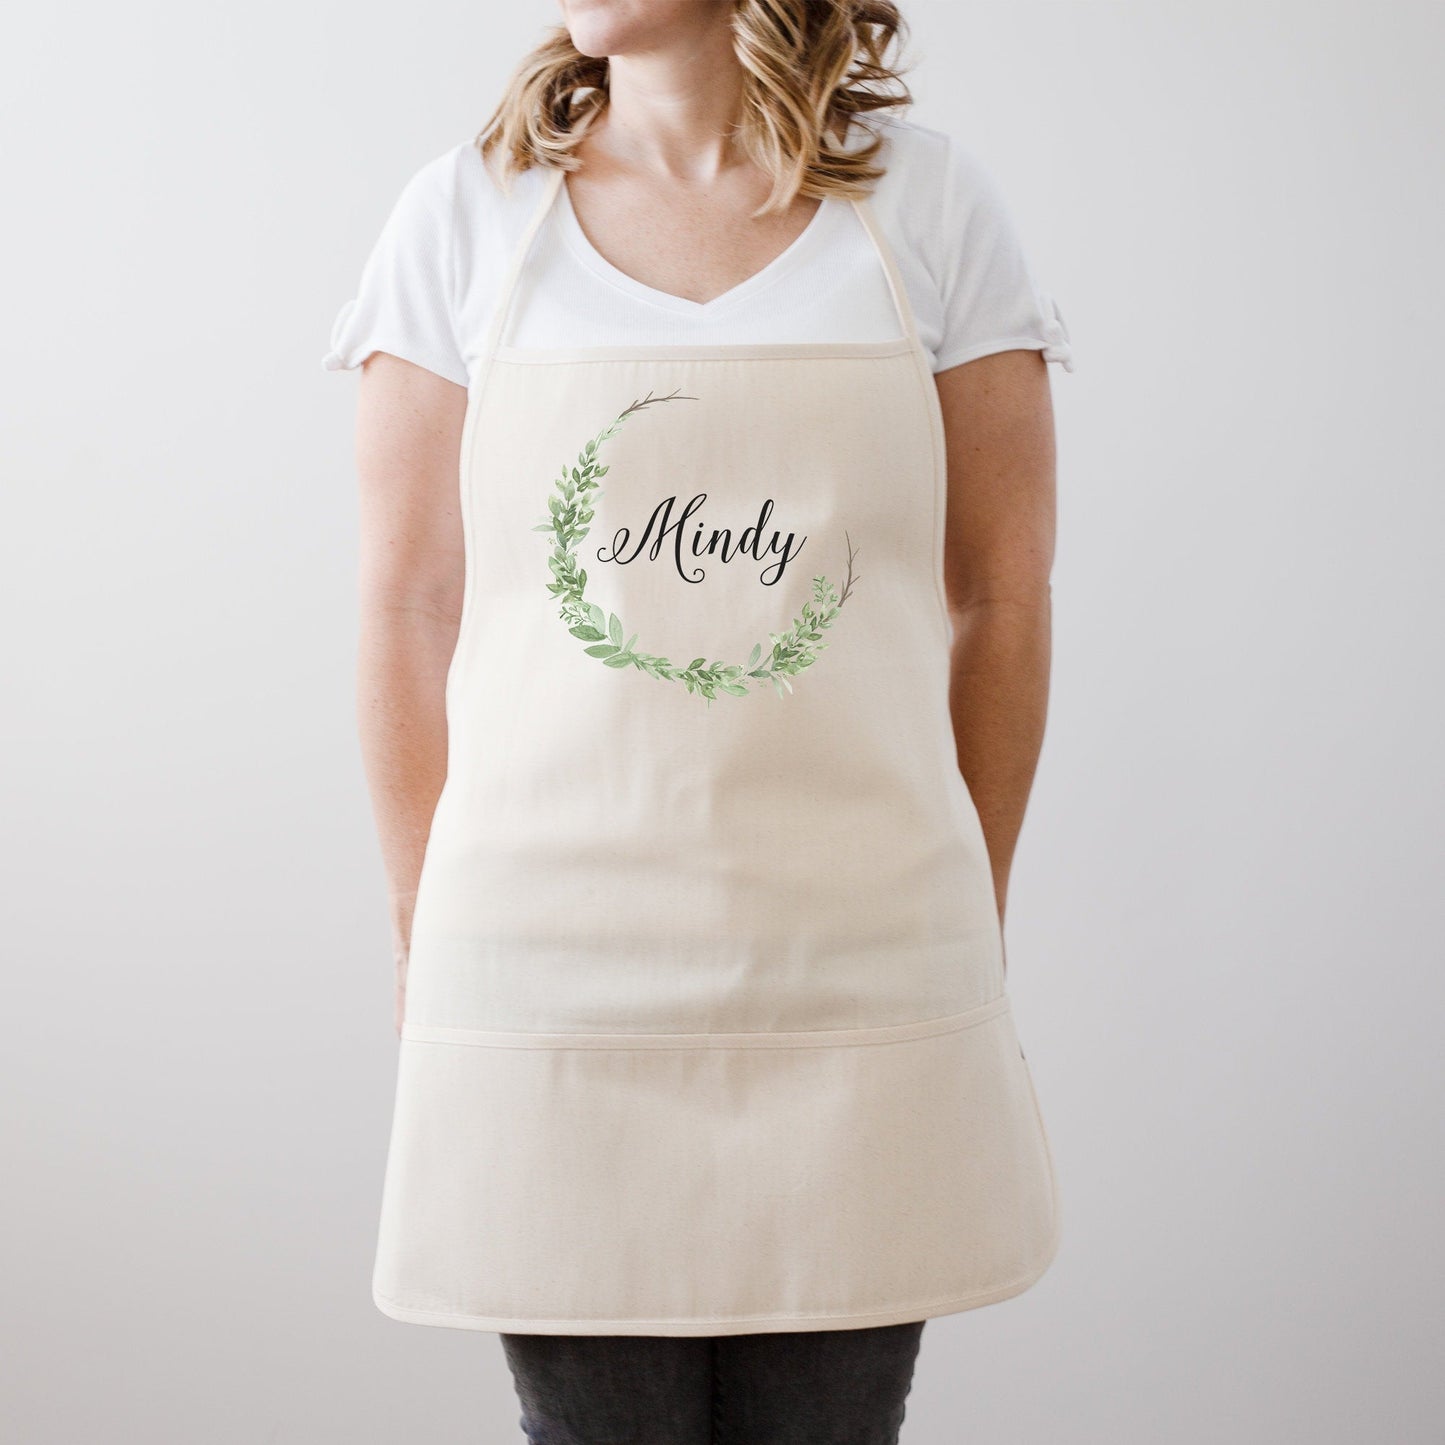 Load image into Gallery viewer, Personalized Apron For Mom | Kitchen Apron | Custom Apron | Kitchen Apron | Custom Monogram Apron | Cotton Canvas Full Apron | Gift for Mom
